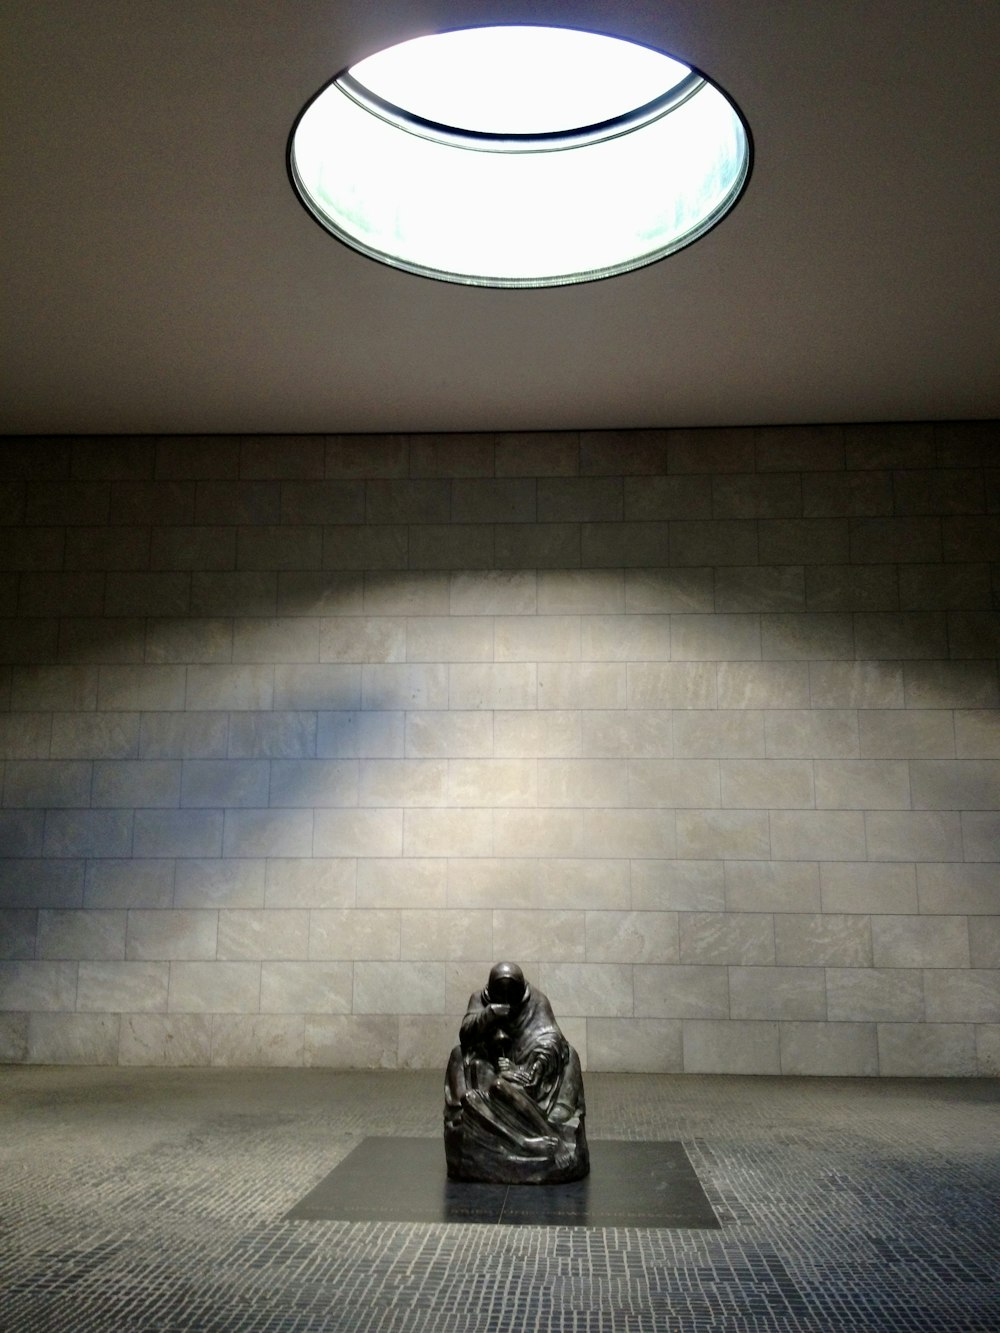 a sculpture in a room with a skylight above it